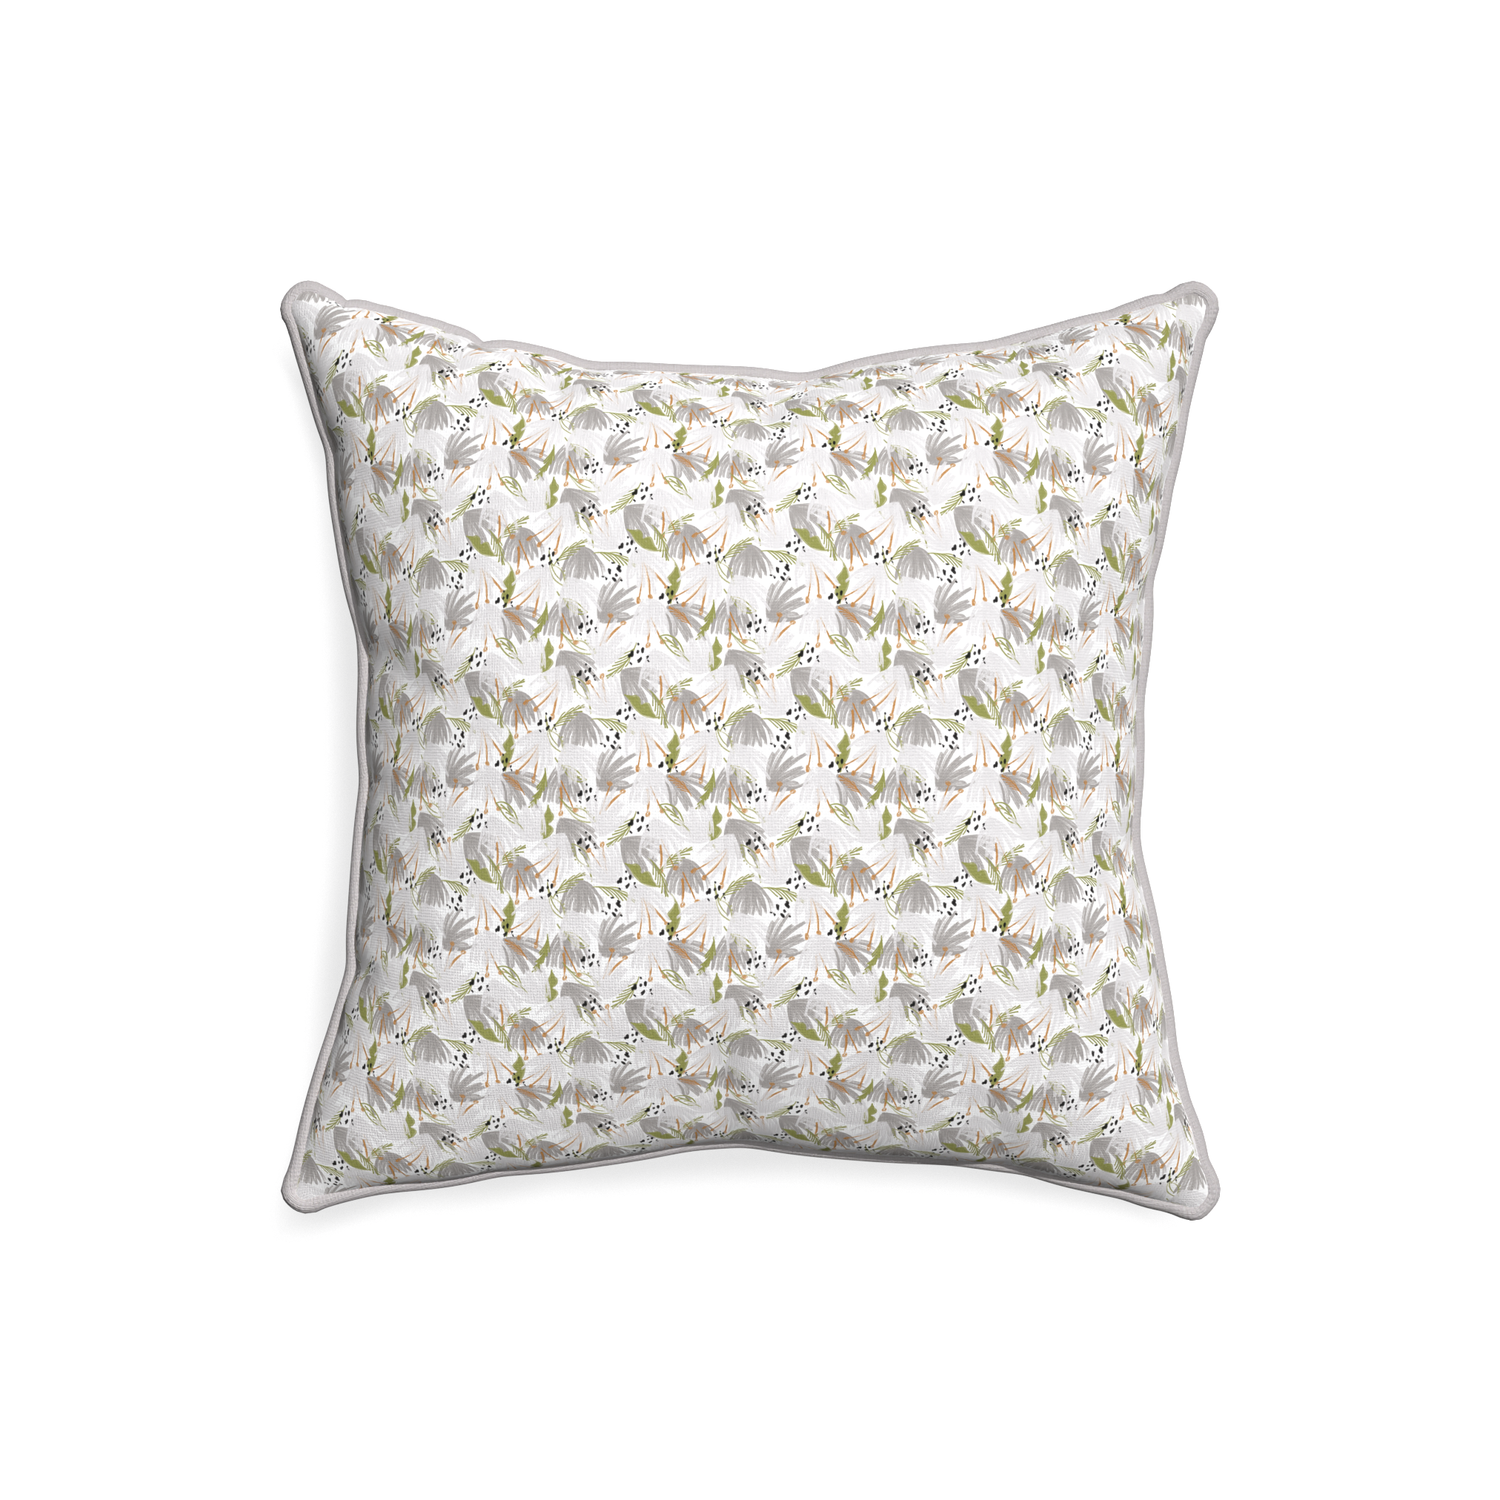 20-square eden grey custom grey floralpillow with pebble piping on white background